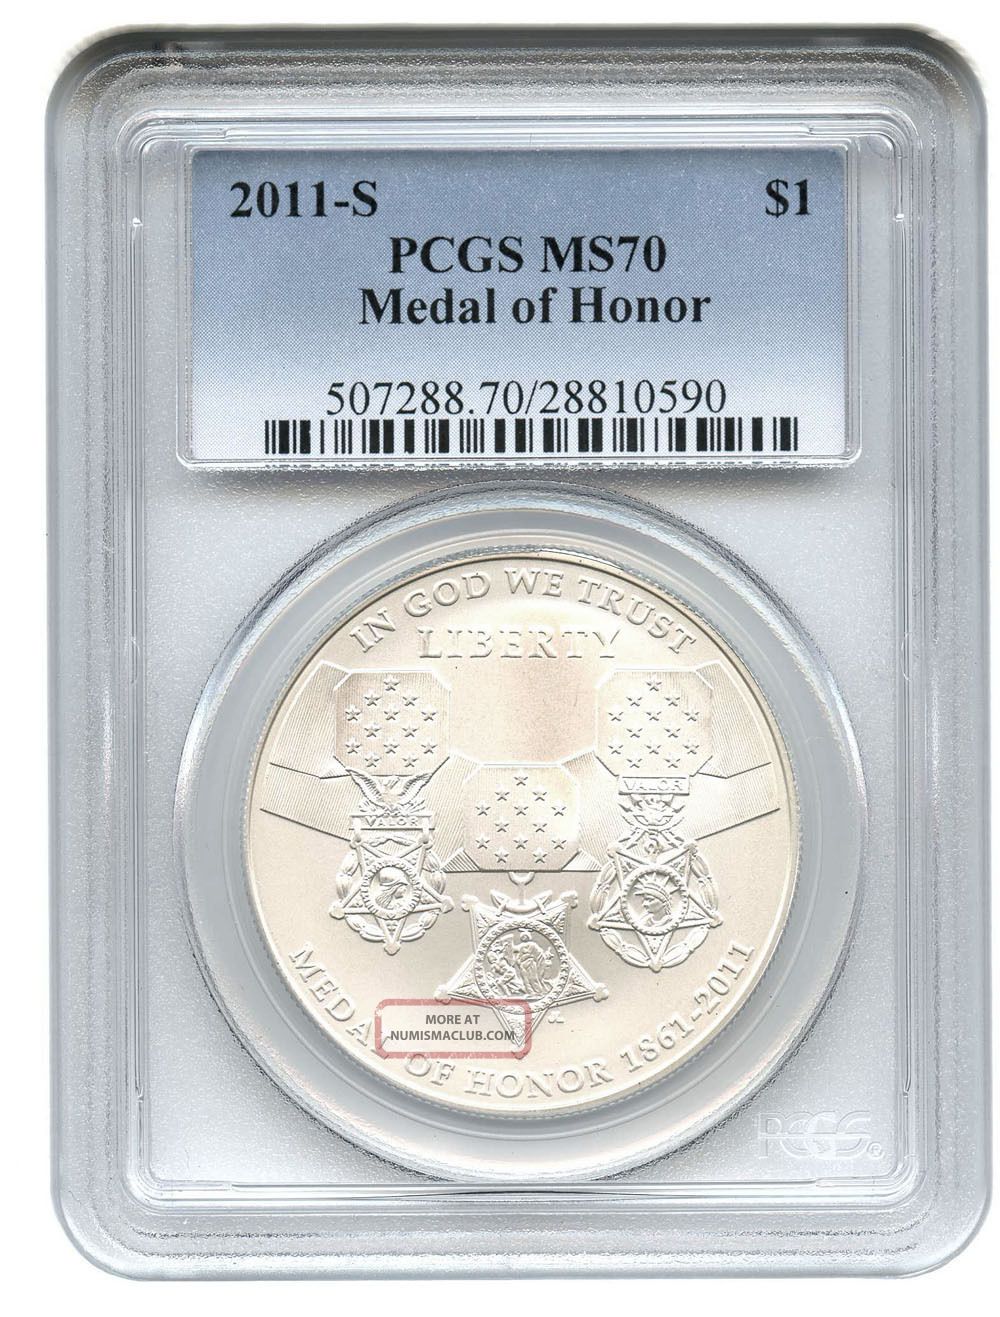 2011 - S Medal Of Honor $1 Pcgs Ms70 Modern Commemorative Silver Dollar